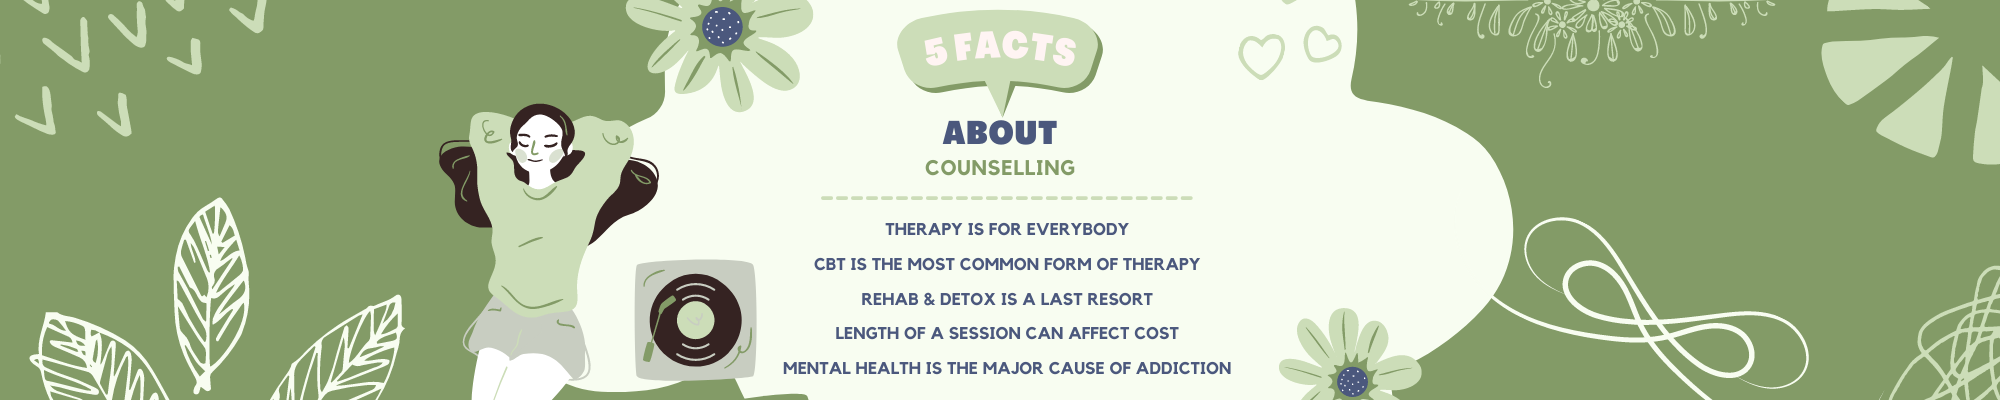 Addiction Counselling Facts and Statistics